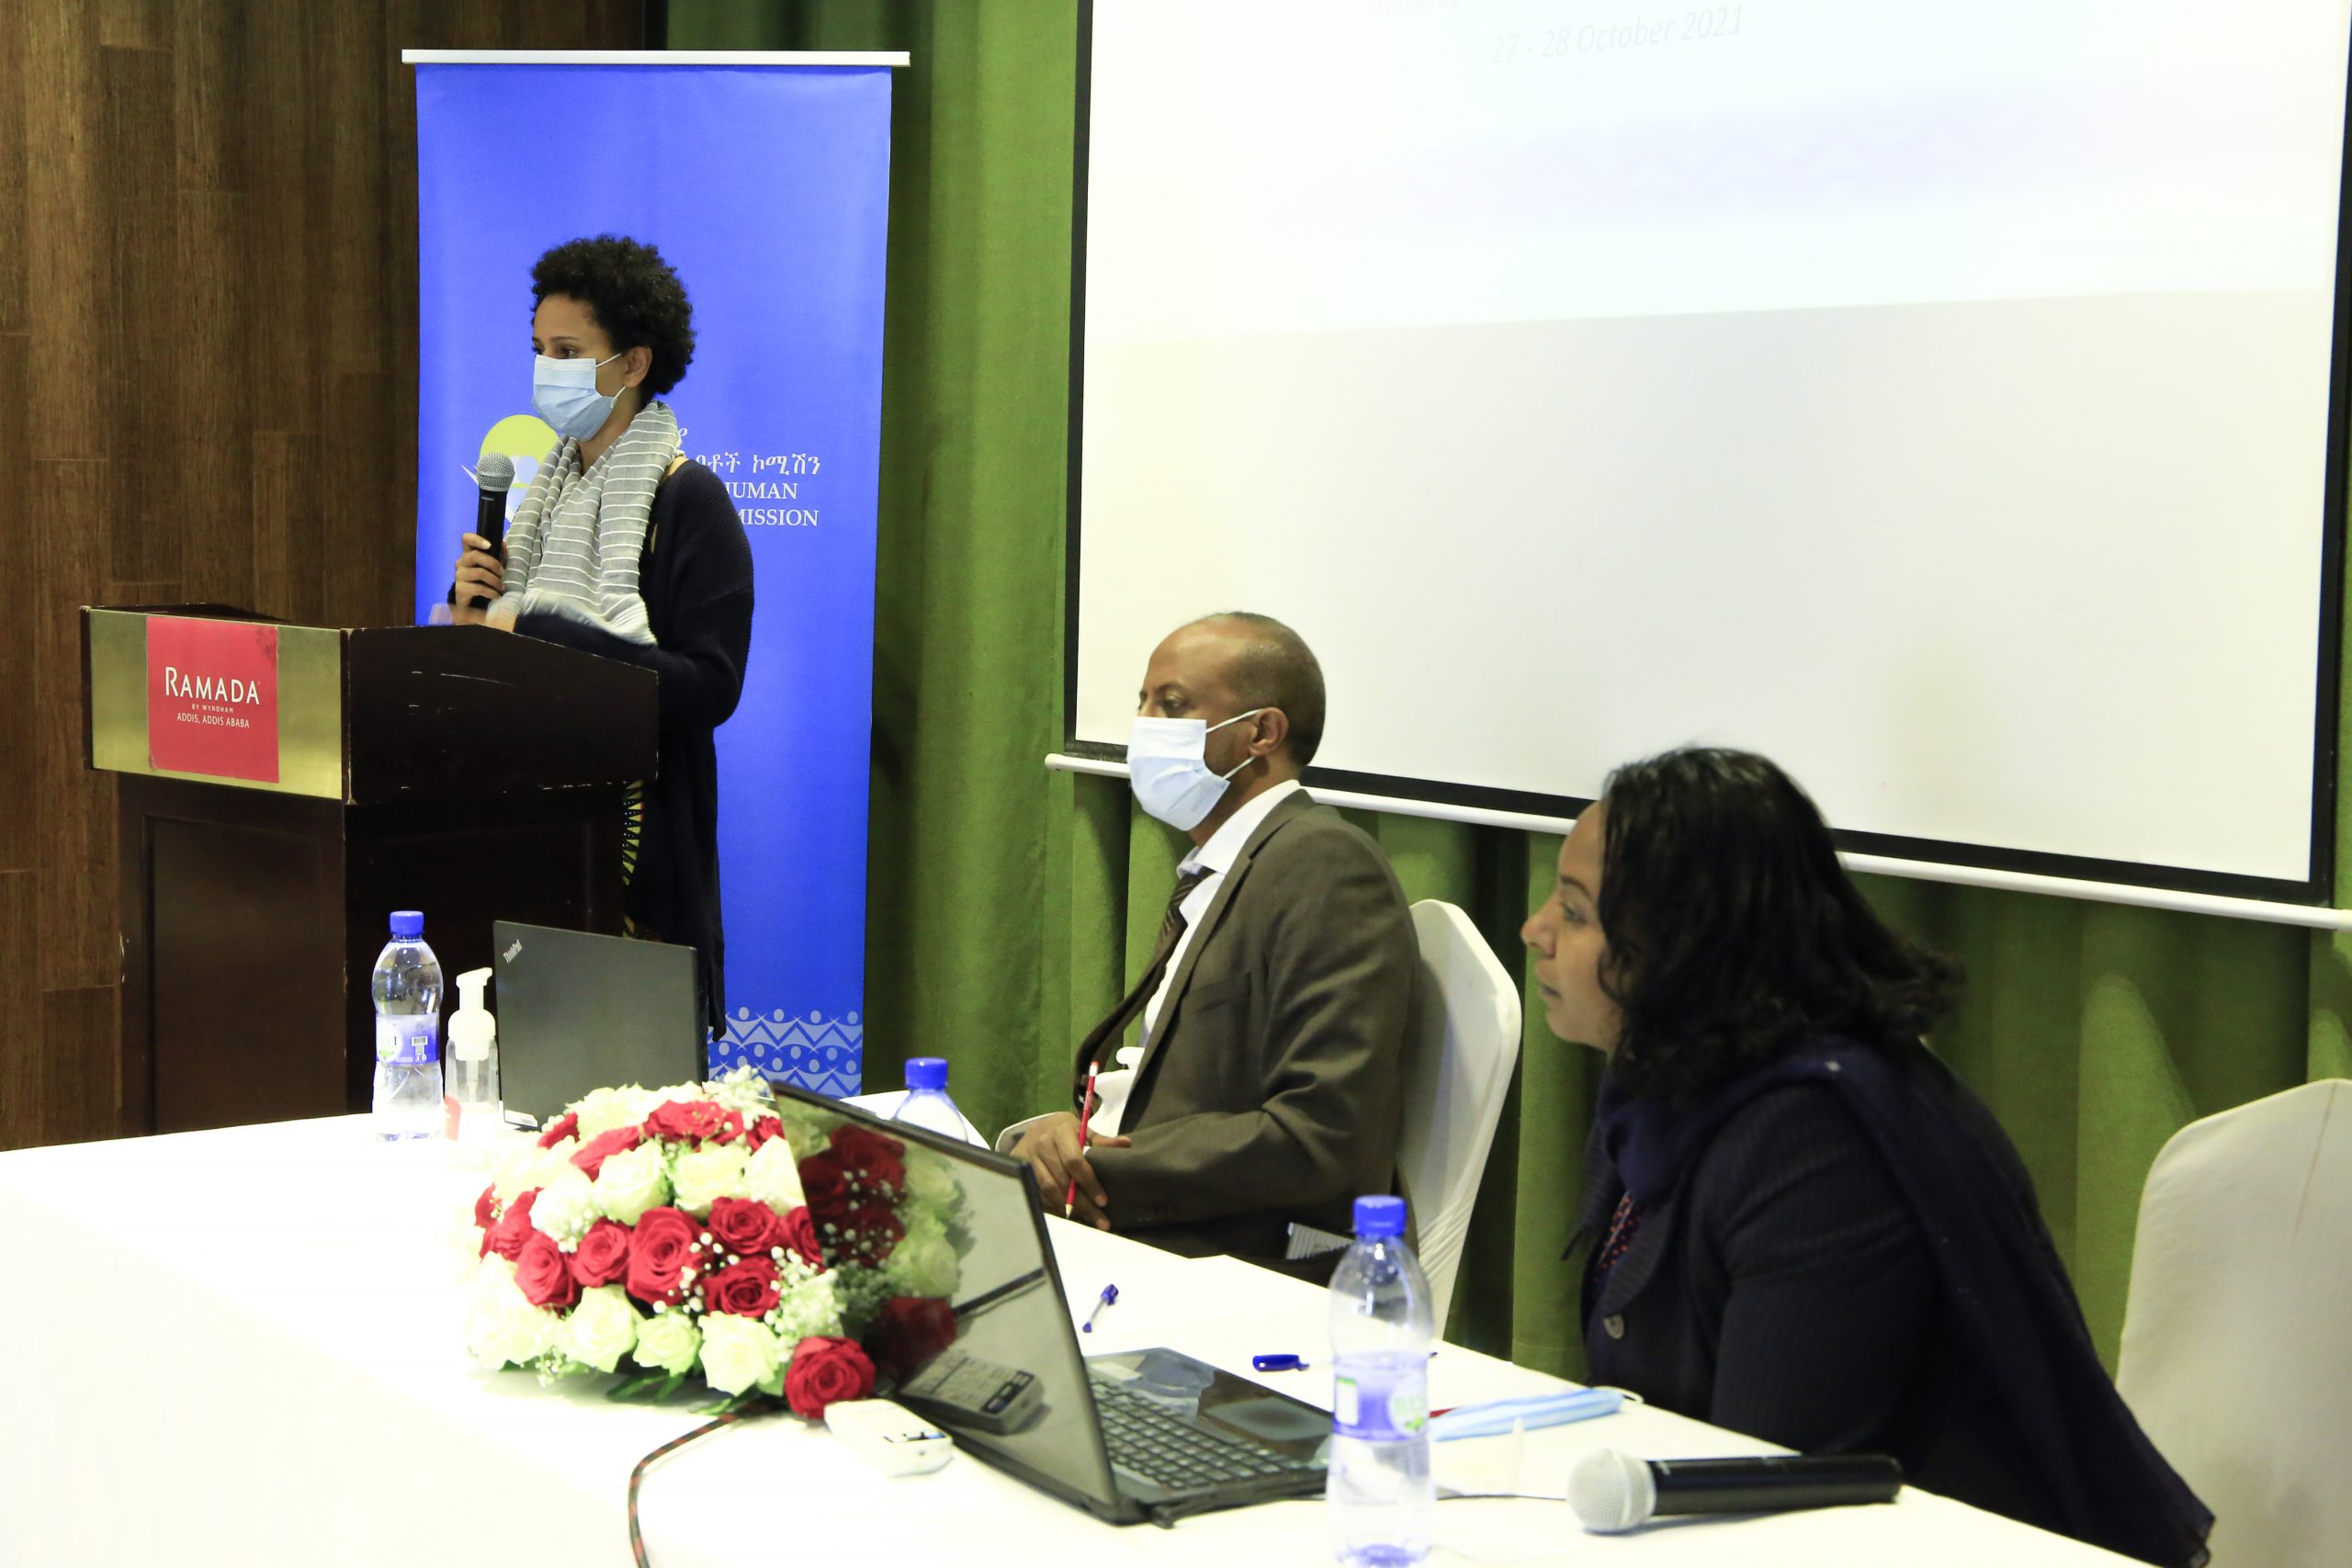 EHRC conducts training on promoting and monitoring recommendations from UN human rights mechanisms